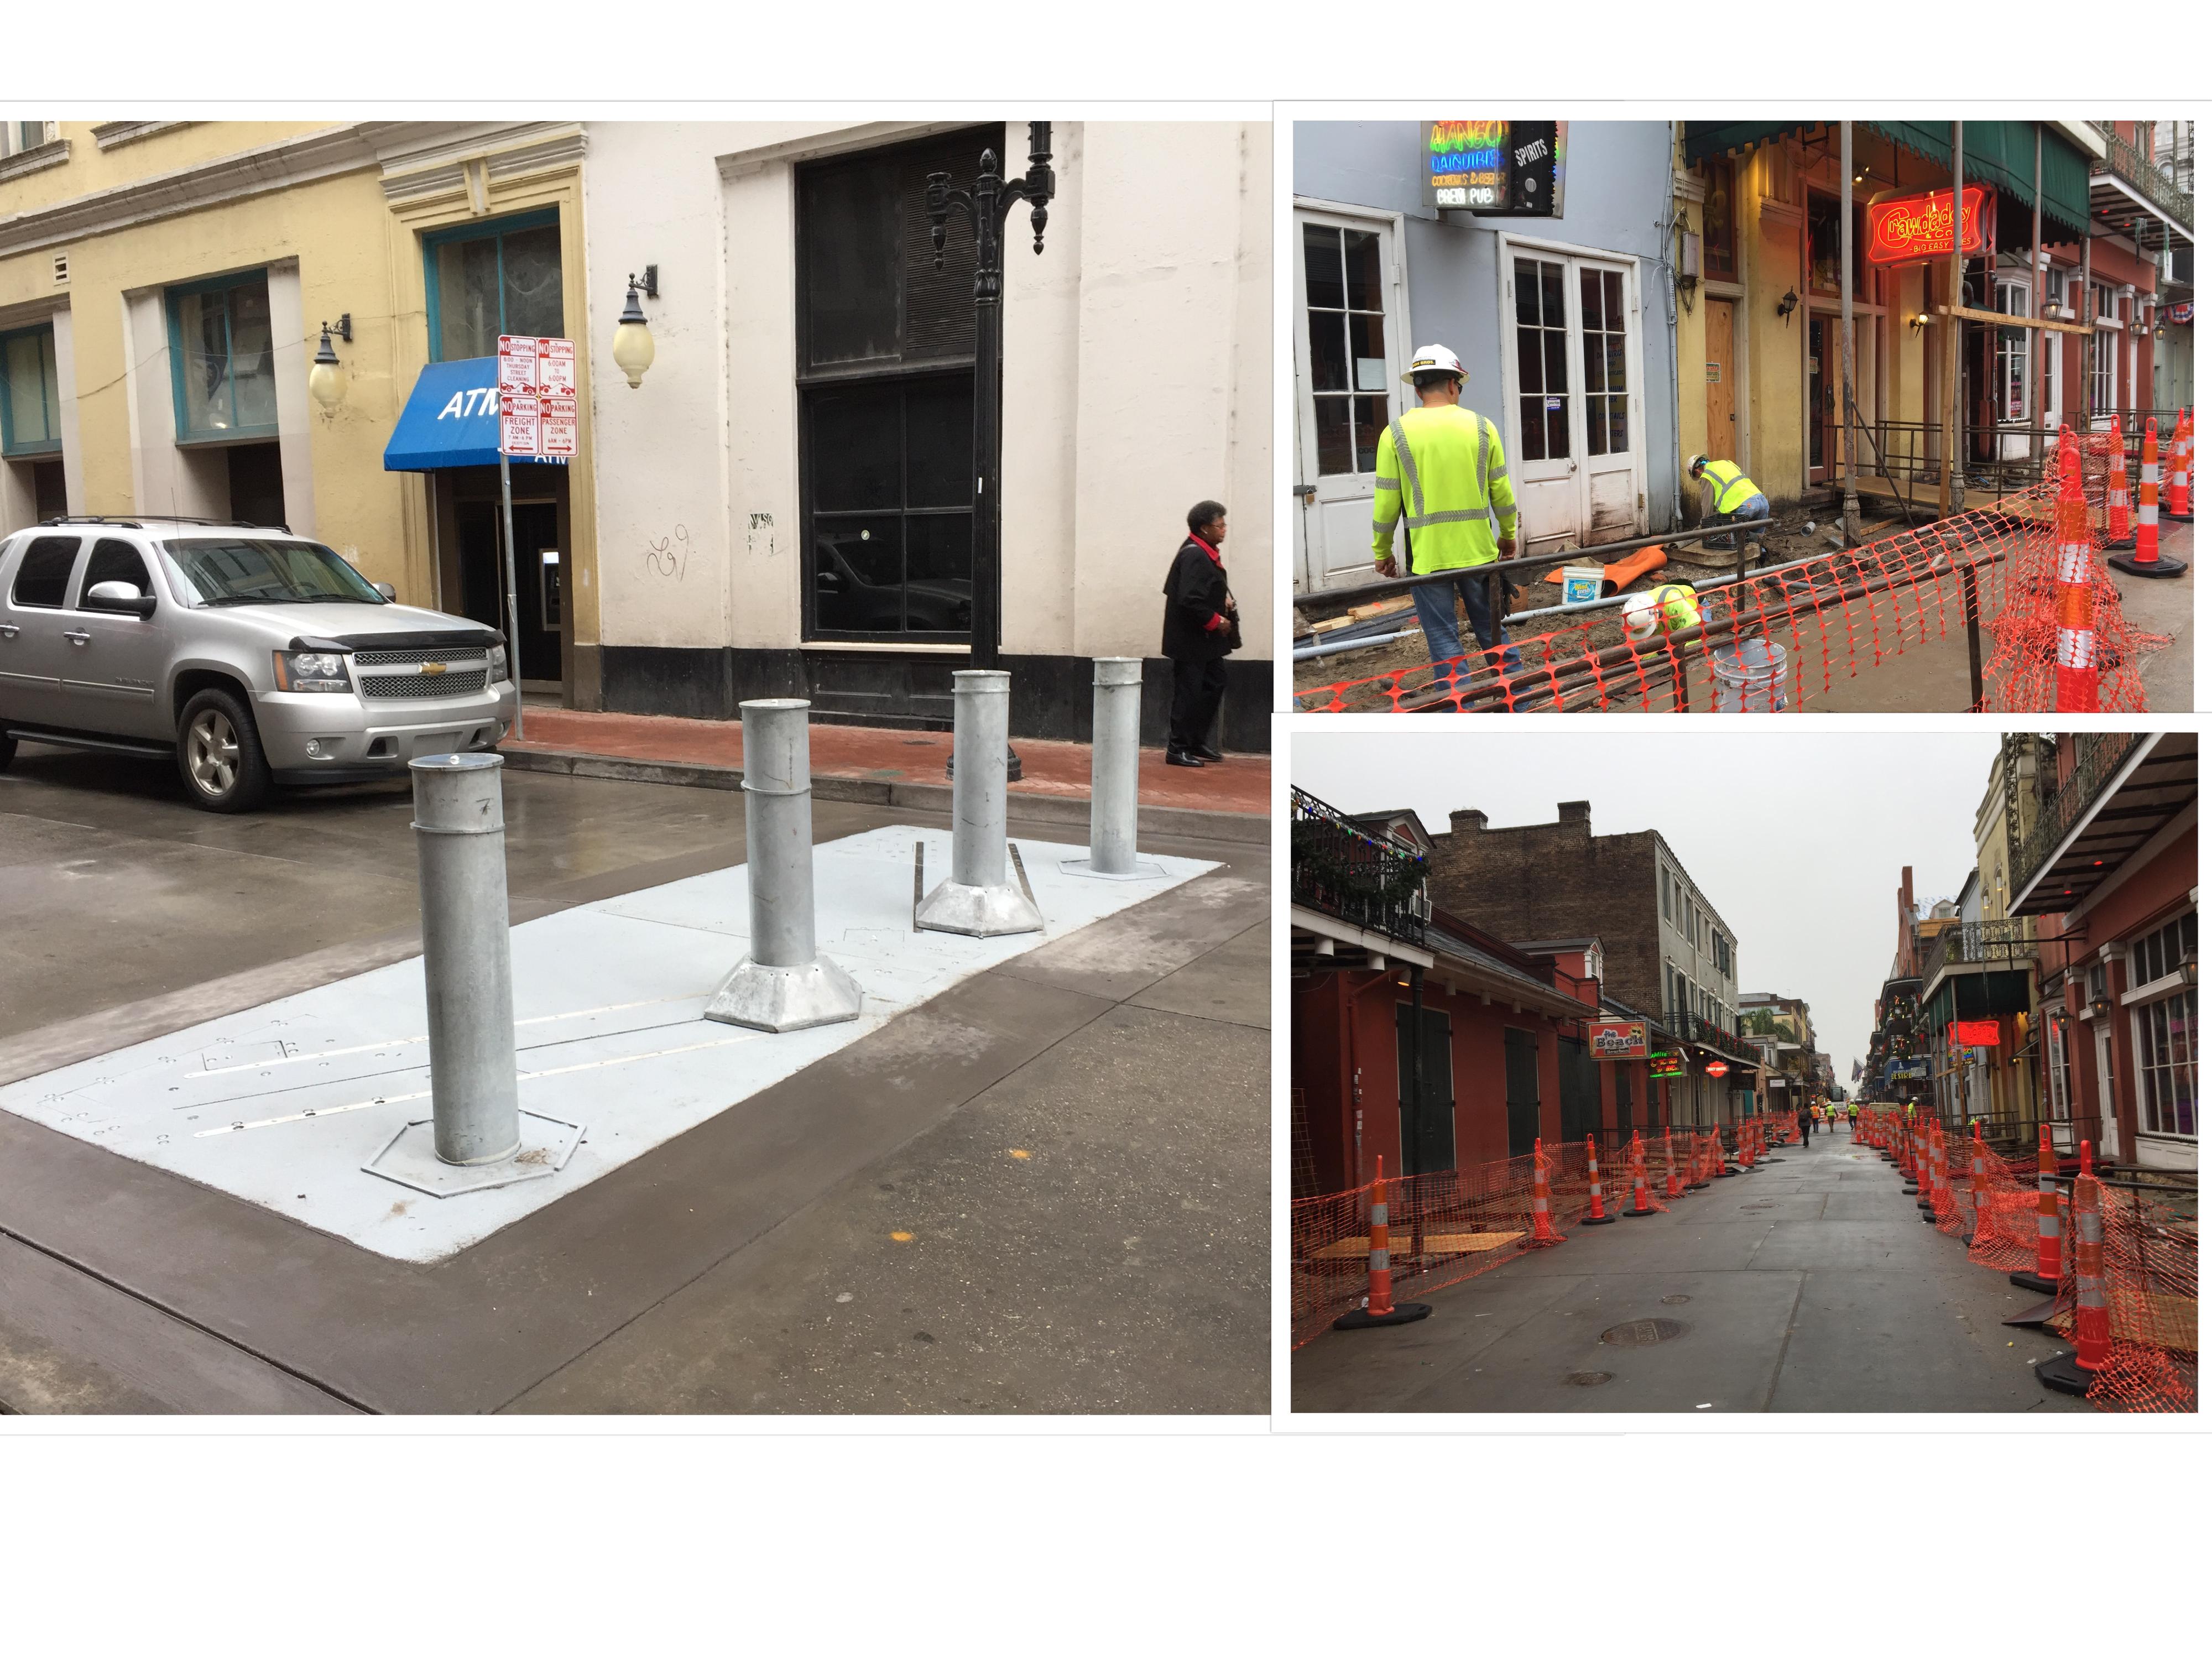 PHASE I OF FRENCH QUARTER INFRASTRUCTURE IMPROVEMENT PROJECT (FQIIP) SCHEDULED TO BE COMPLETE THIS MONTH, PHASE II EXPLORATORY WORK WILL LAST THROUGH JANUARY